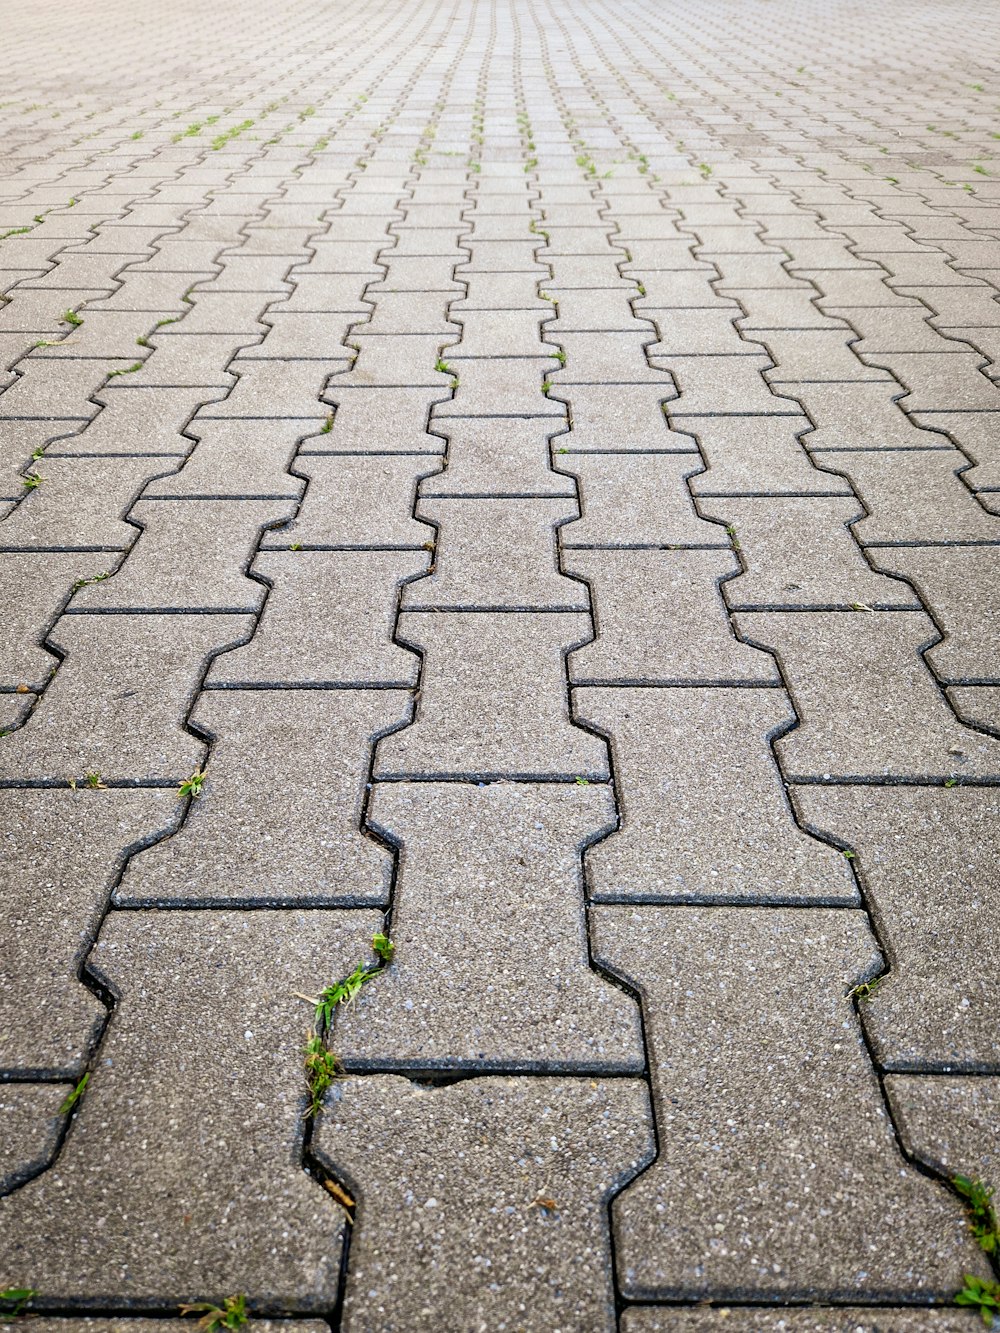 a cobblestone road with a brick walkway